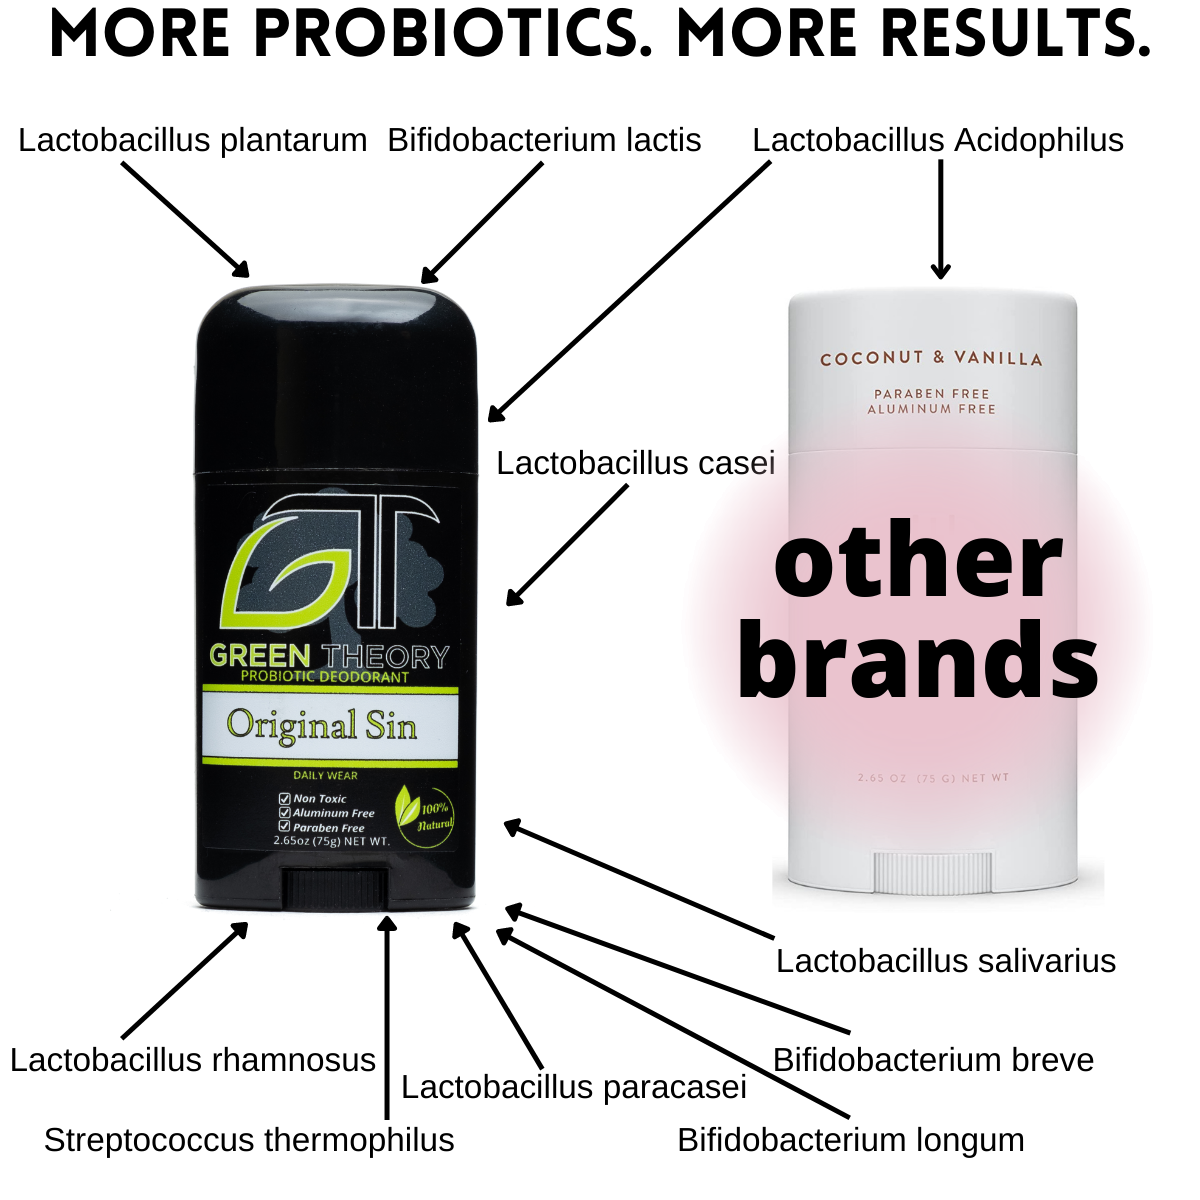 graphic comparing green theory original sin probiotic deodorant to other brands. Green Theory uses 10 strains of probiotics while others use only 1